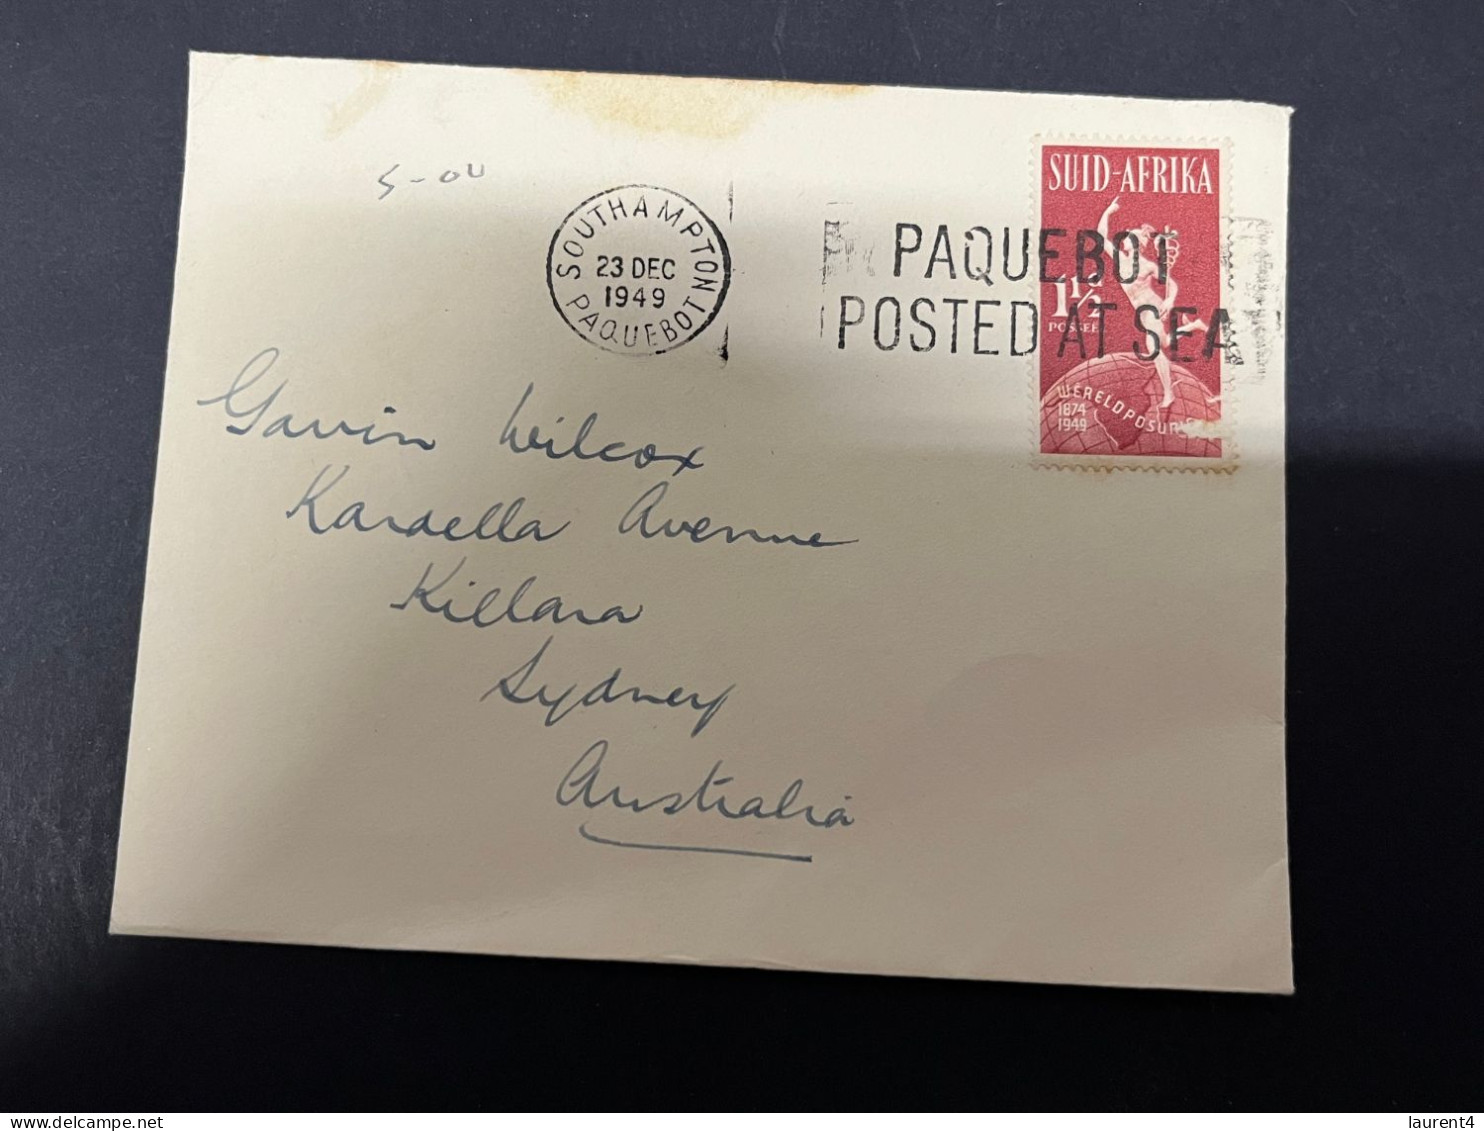 7-12-2023 (3 W 34) Paquebot Mail Posted From South Africa To Australia (1949) As Seen On Scan (Union Castle Line) - Autres (Mer)